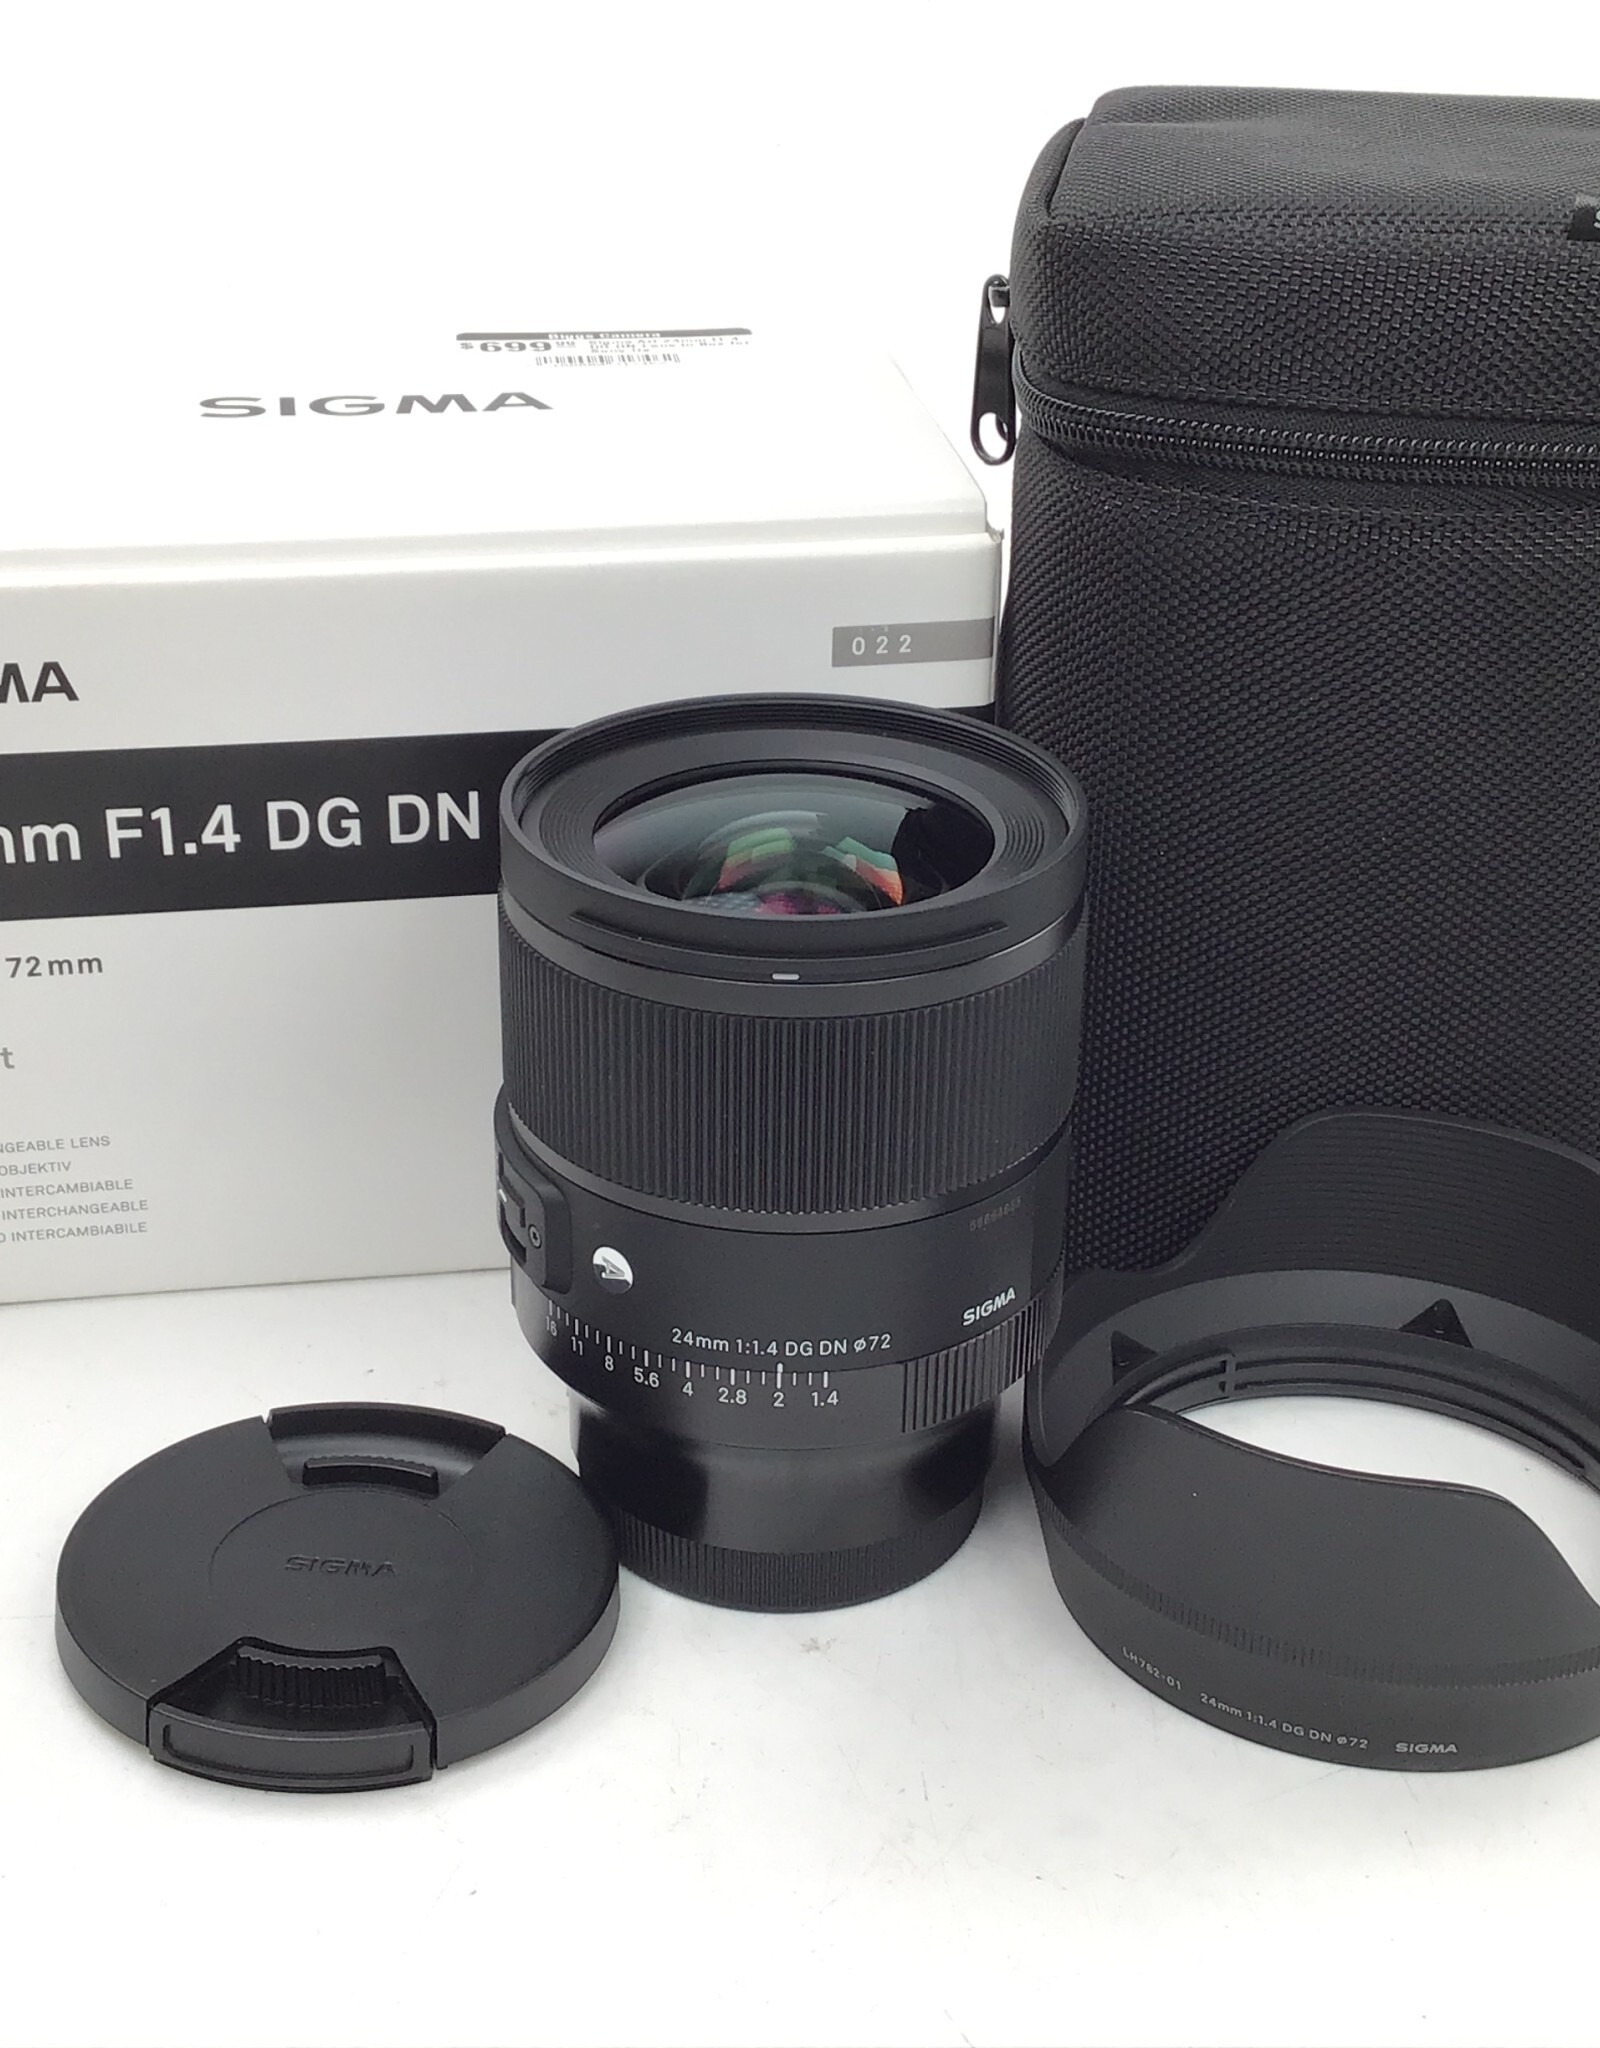 SIGMA Sigma Art 24mm f1.4 DG DN Lens in Box for Sony Used LN